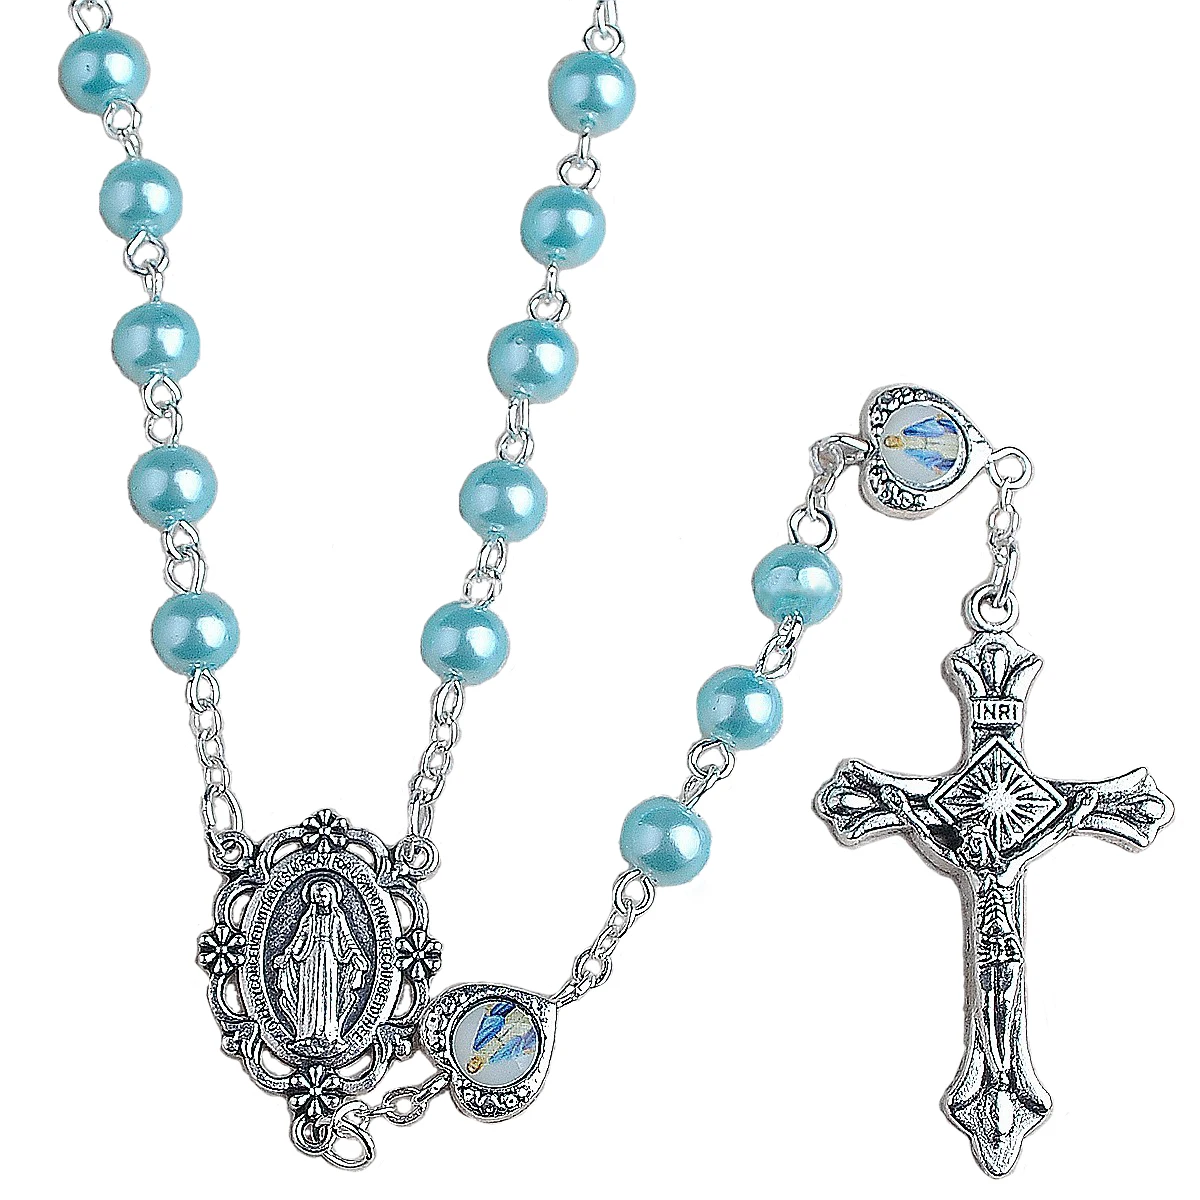 

6mm Light Blue Pearl Beads Rosary with Metal Virgin Mary Medal Catholic Rosaries Pendant for Wholesale Rosaries